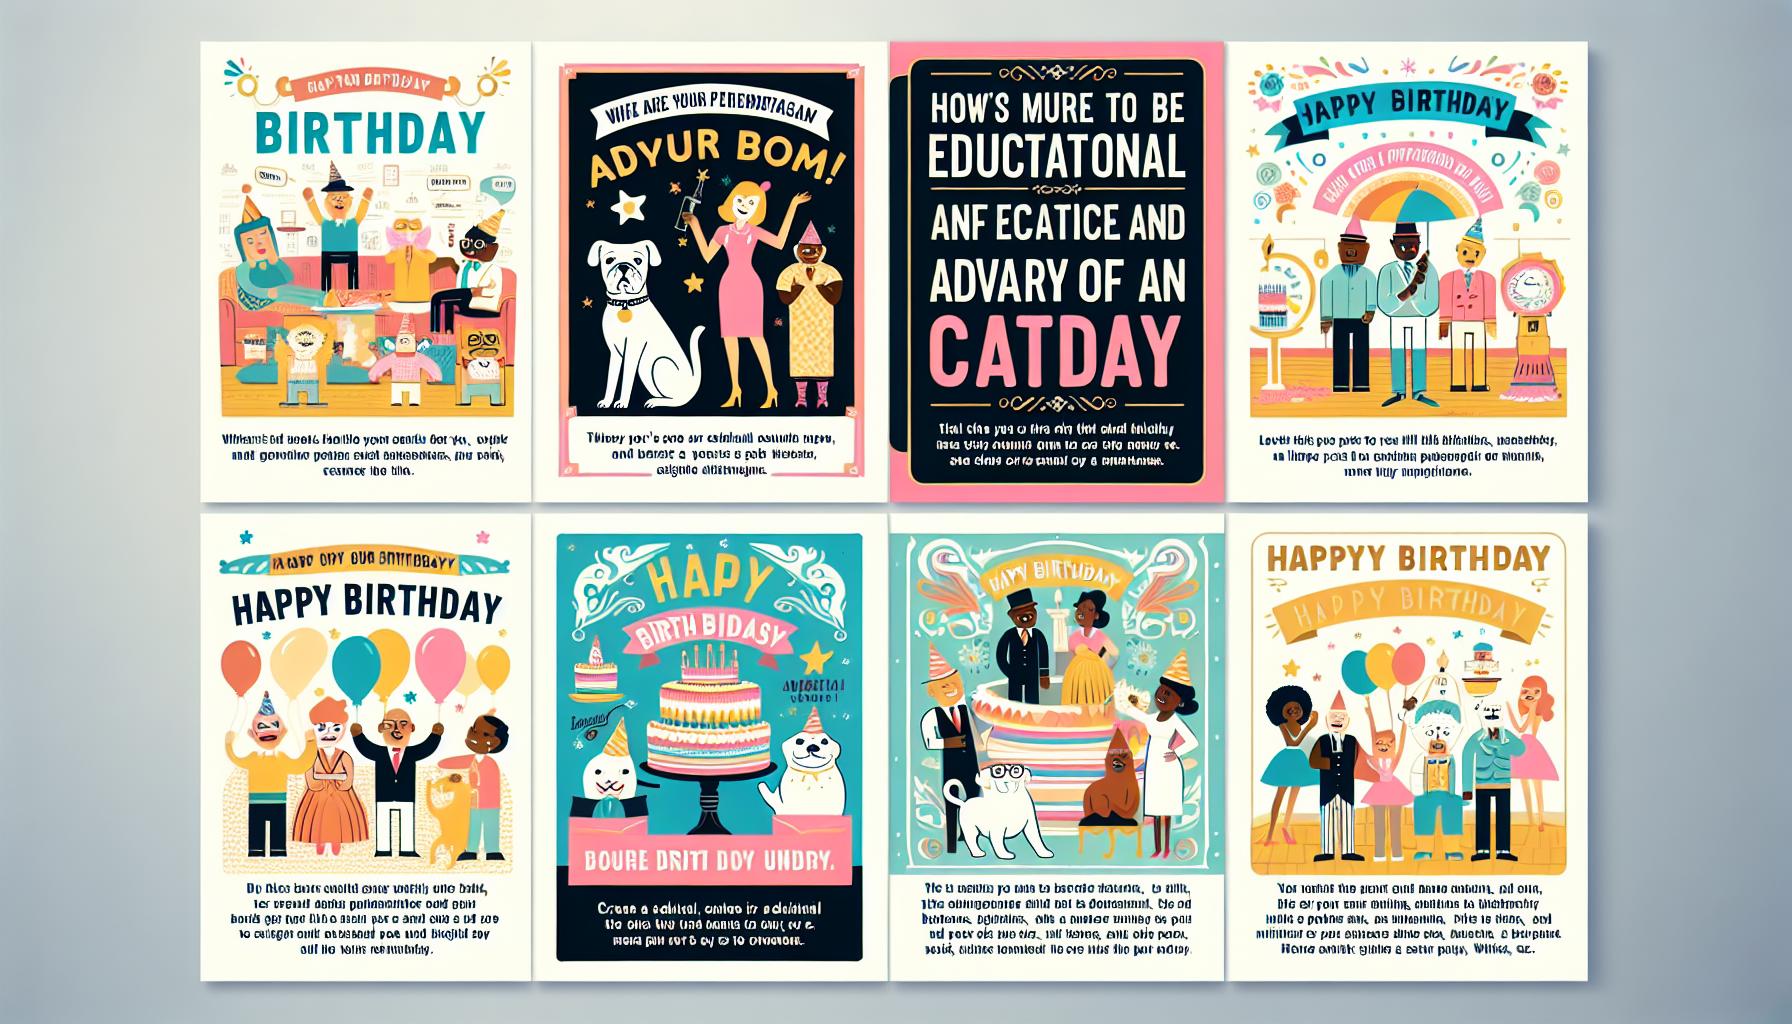 Unleash the Laughs: Bold and Brazen Ideas for Rude Birthday Cards